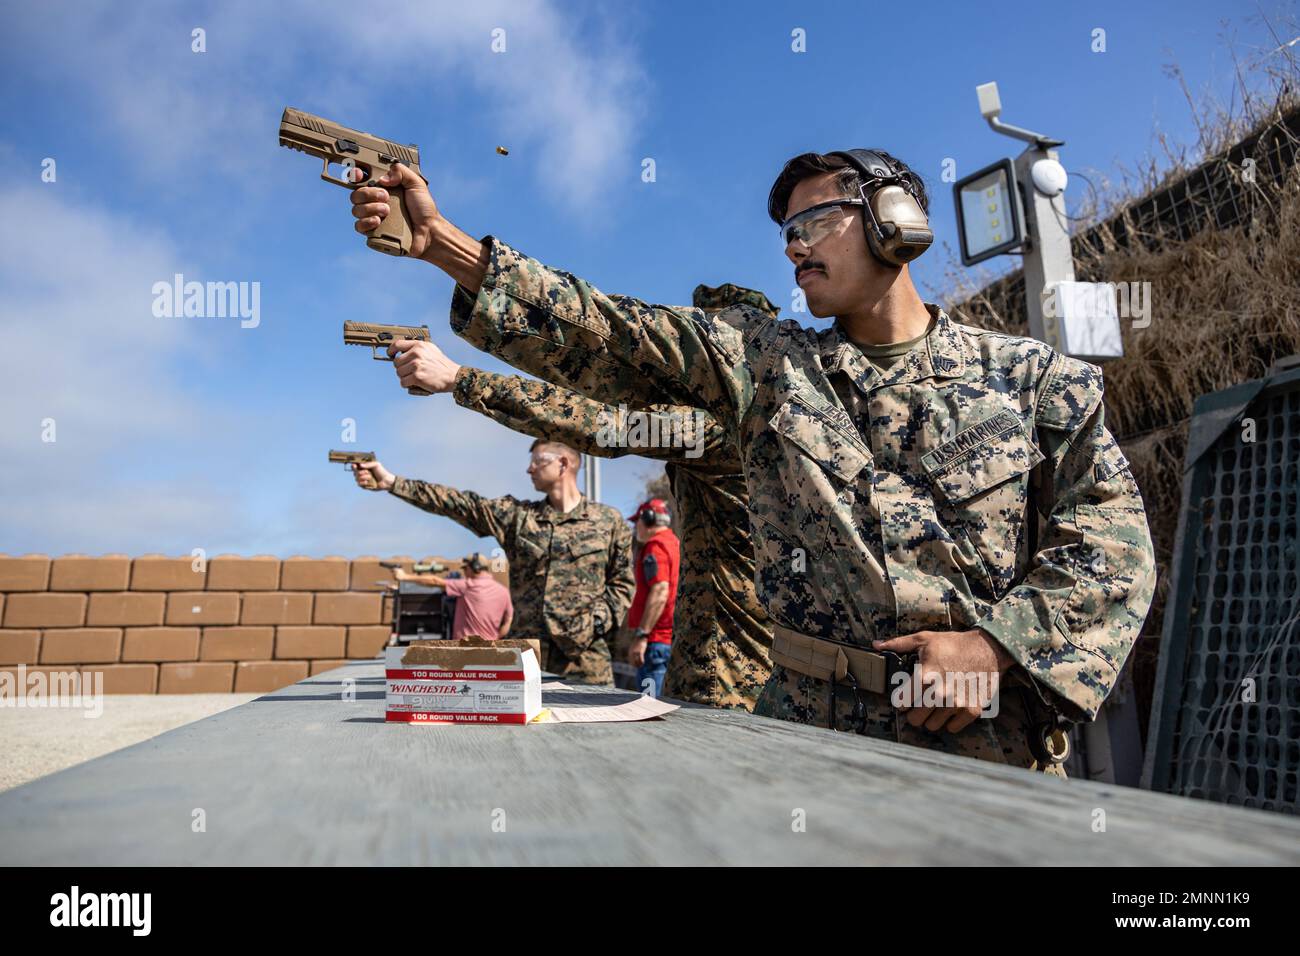 images 4 and Alamy 1113 - photography stock hi-res